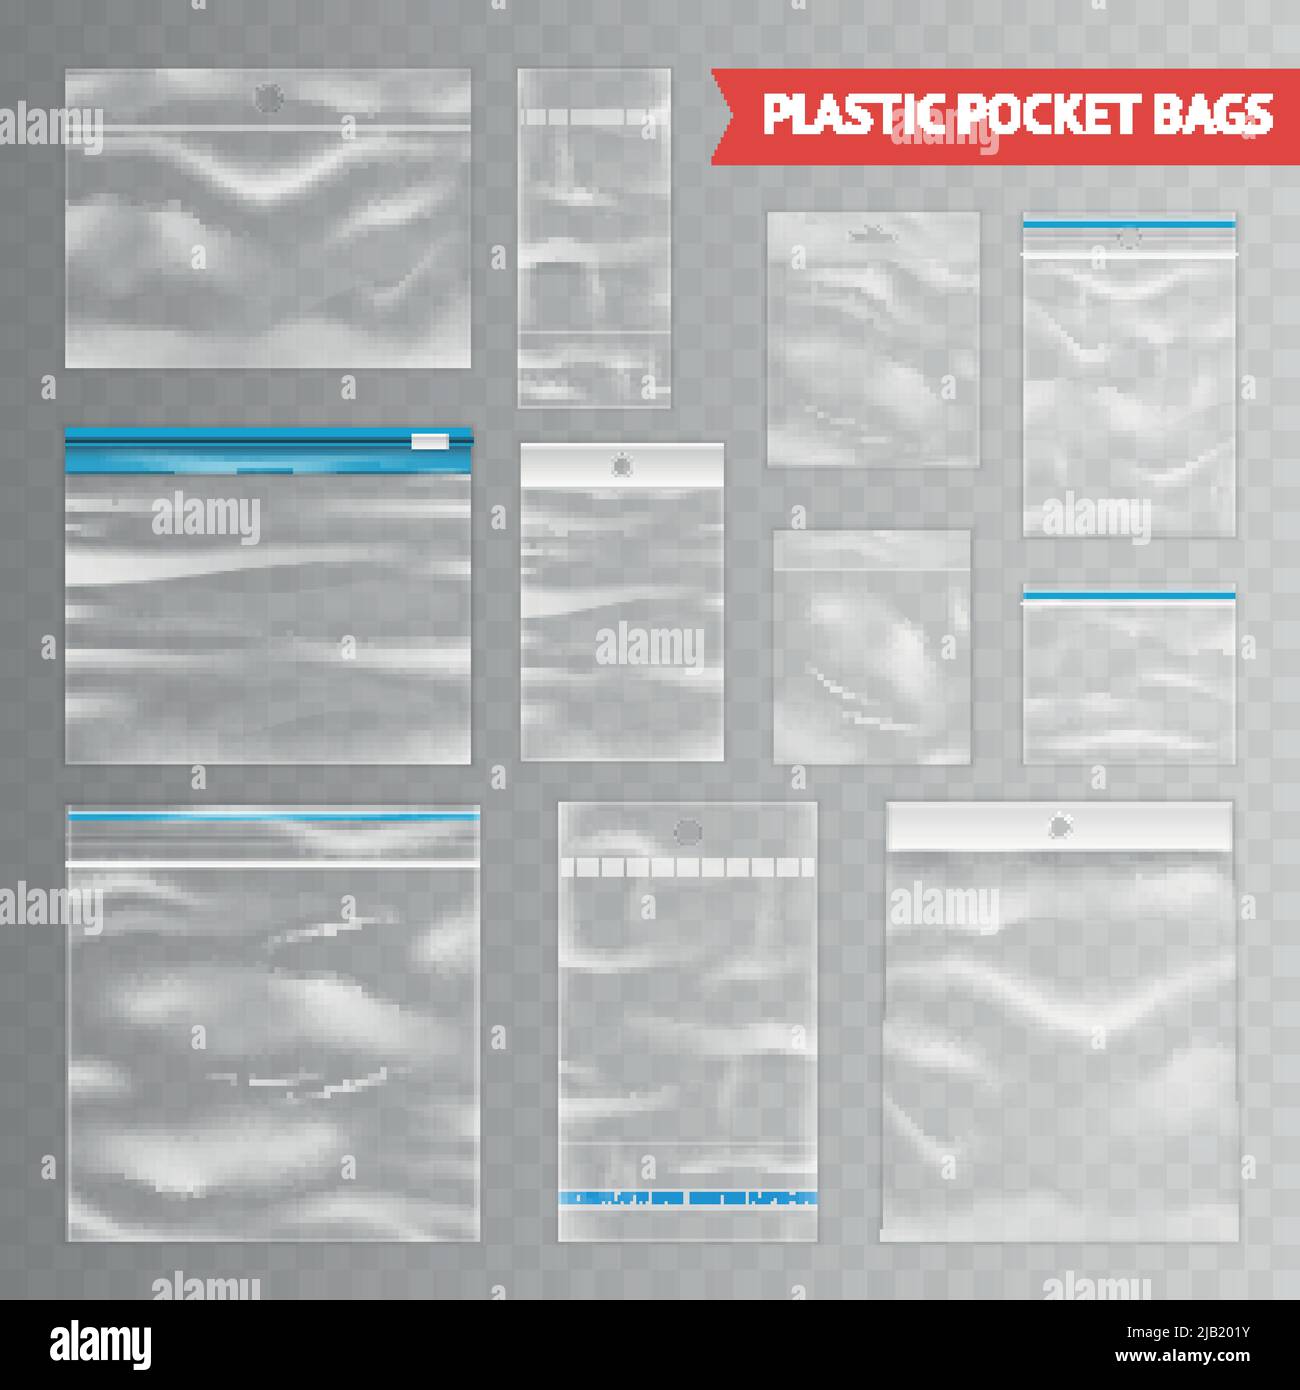 Reclosable resealable zipper clear plastic pocket bags assortment realistic collection on transparent background vector illustration Stock Vector